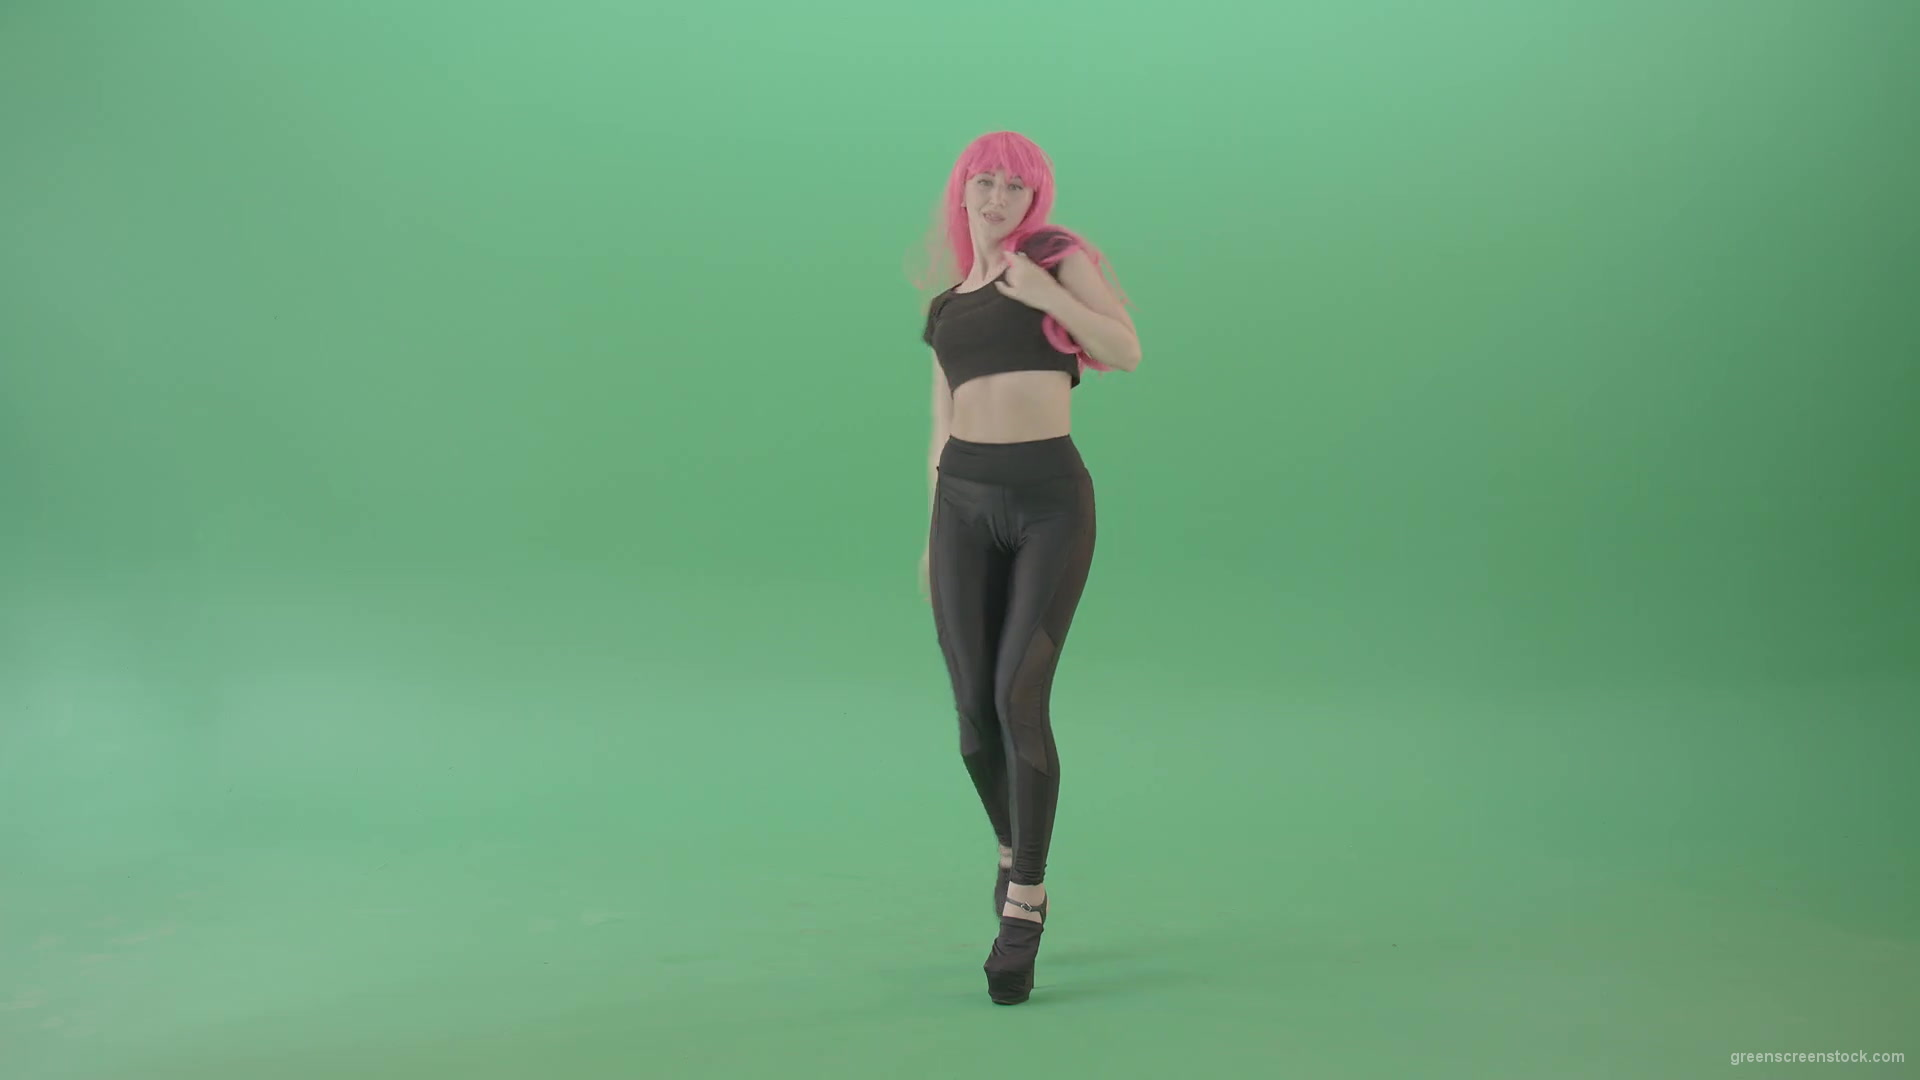 Pink-hair-girl-showing-sexy-moves-dancing-strip-on-green-screen-4K-Video-Footage-1920_005 Green Screen Stock